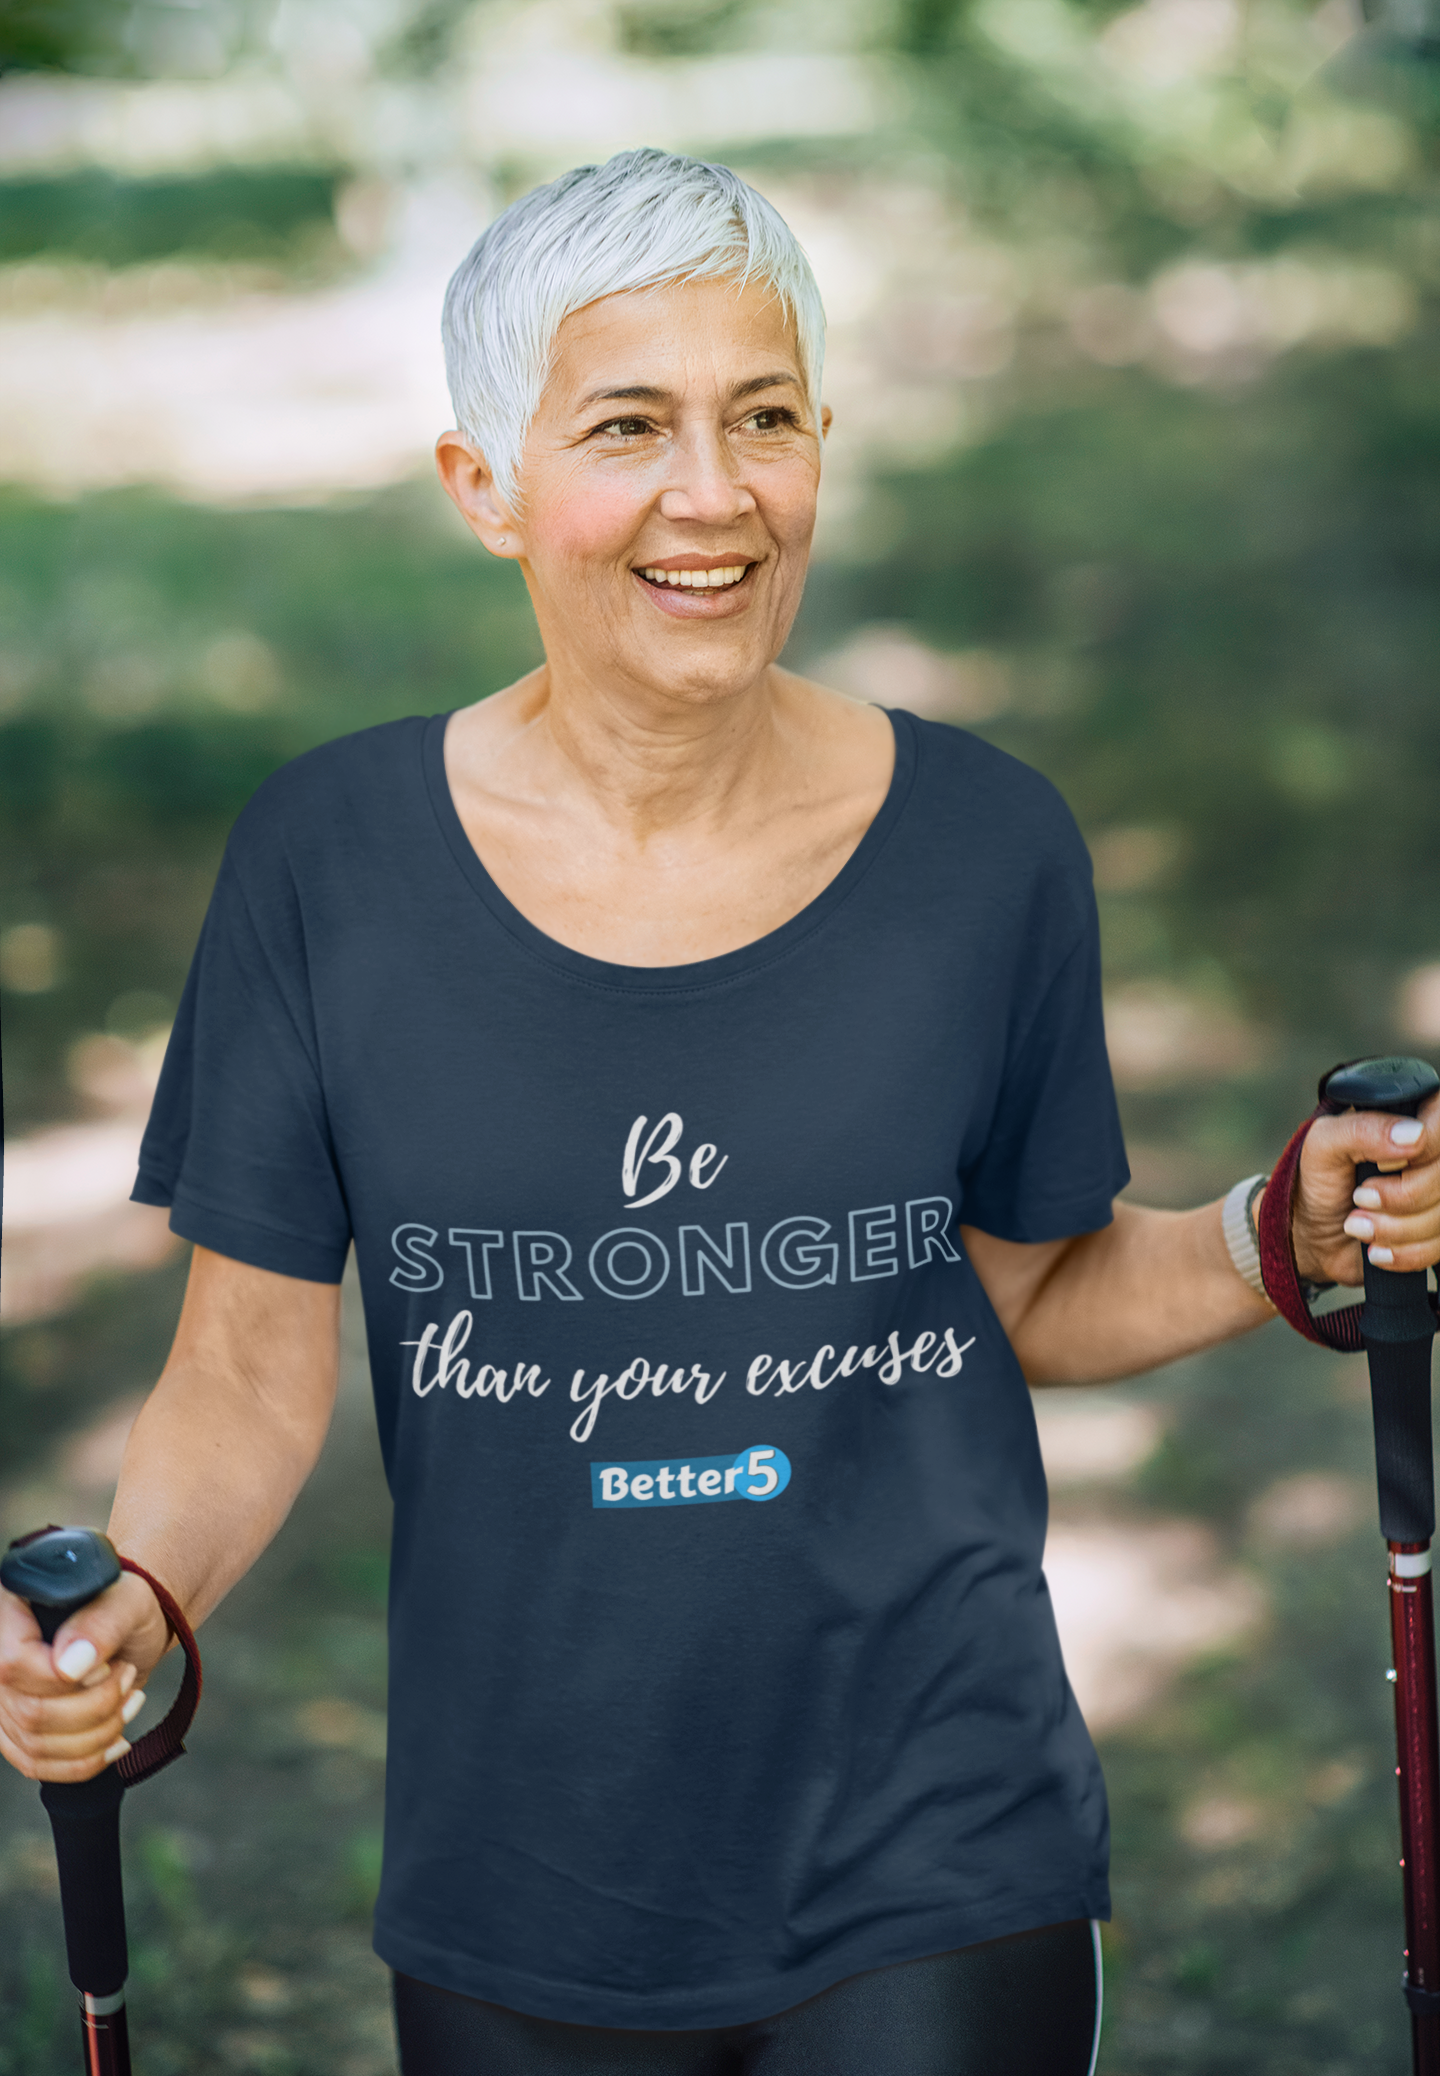 "Be Stronger Than Your Excuses" Short-Sleeve Unisex T-Shirt